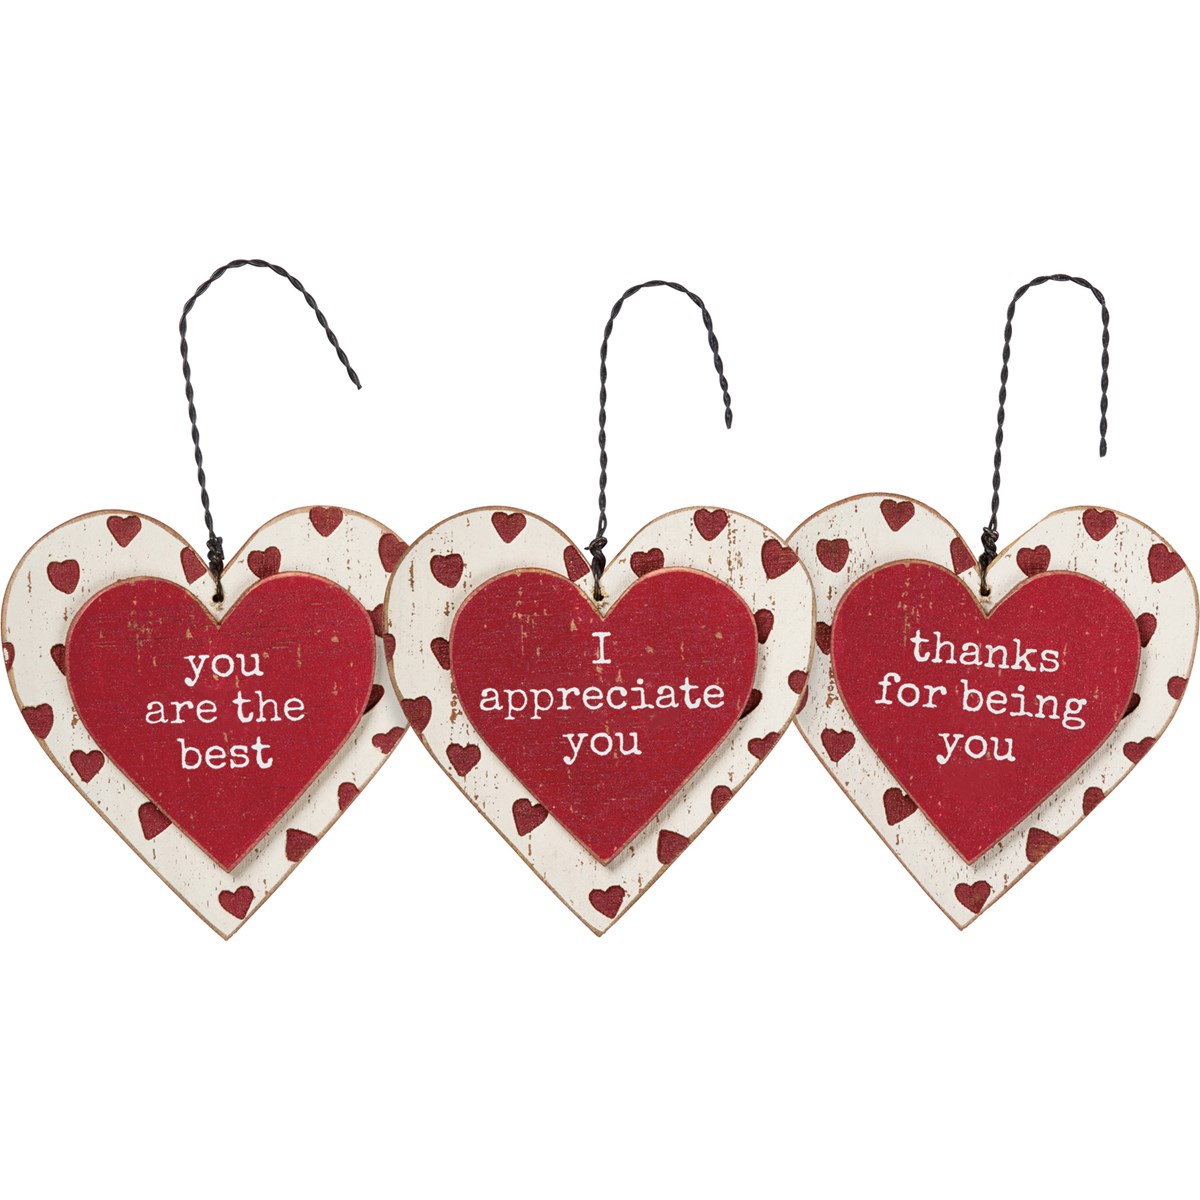 You Are The Best Ornament Set - Wood, Wire